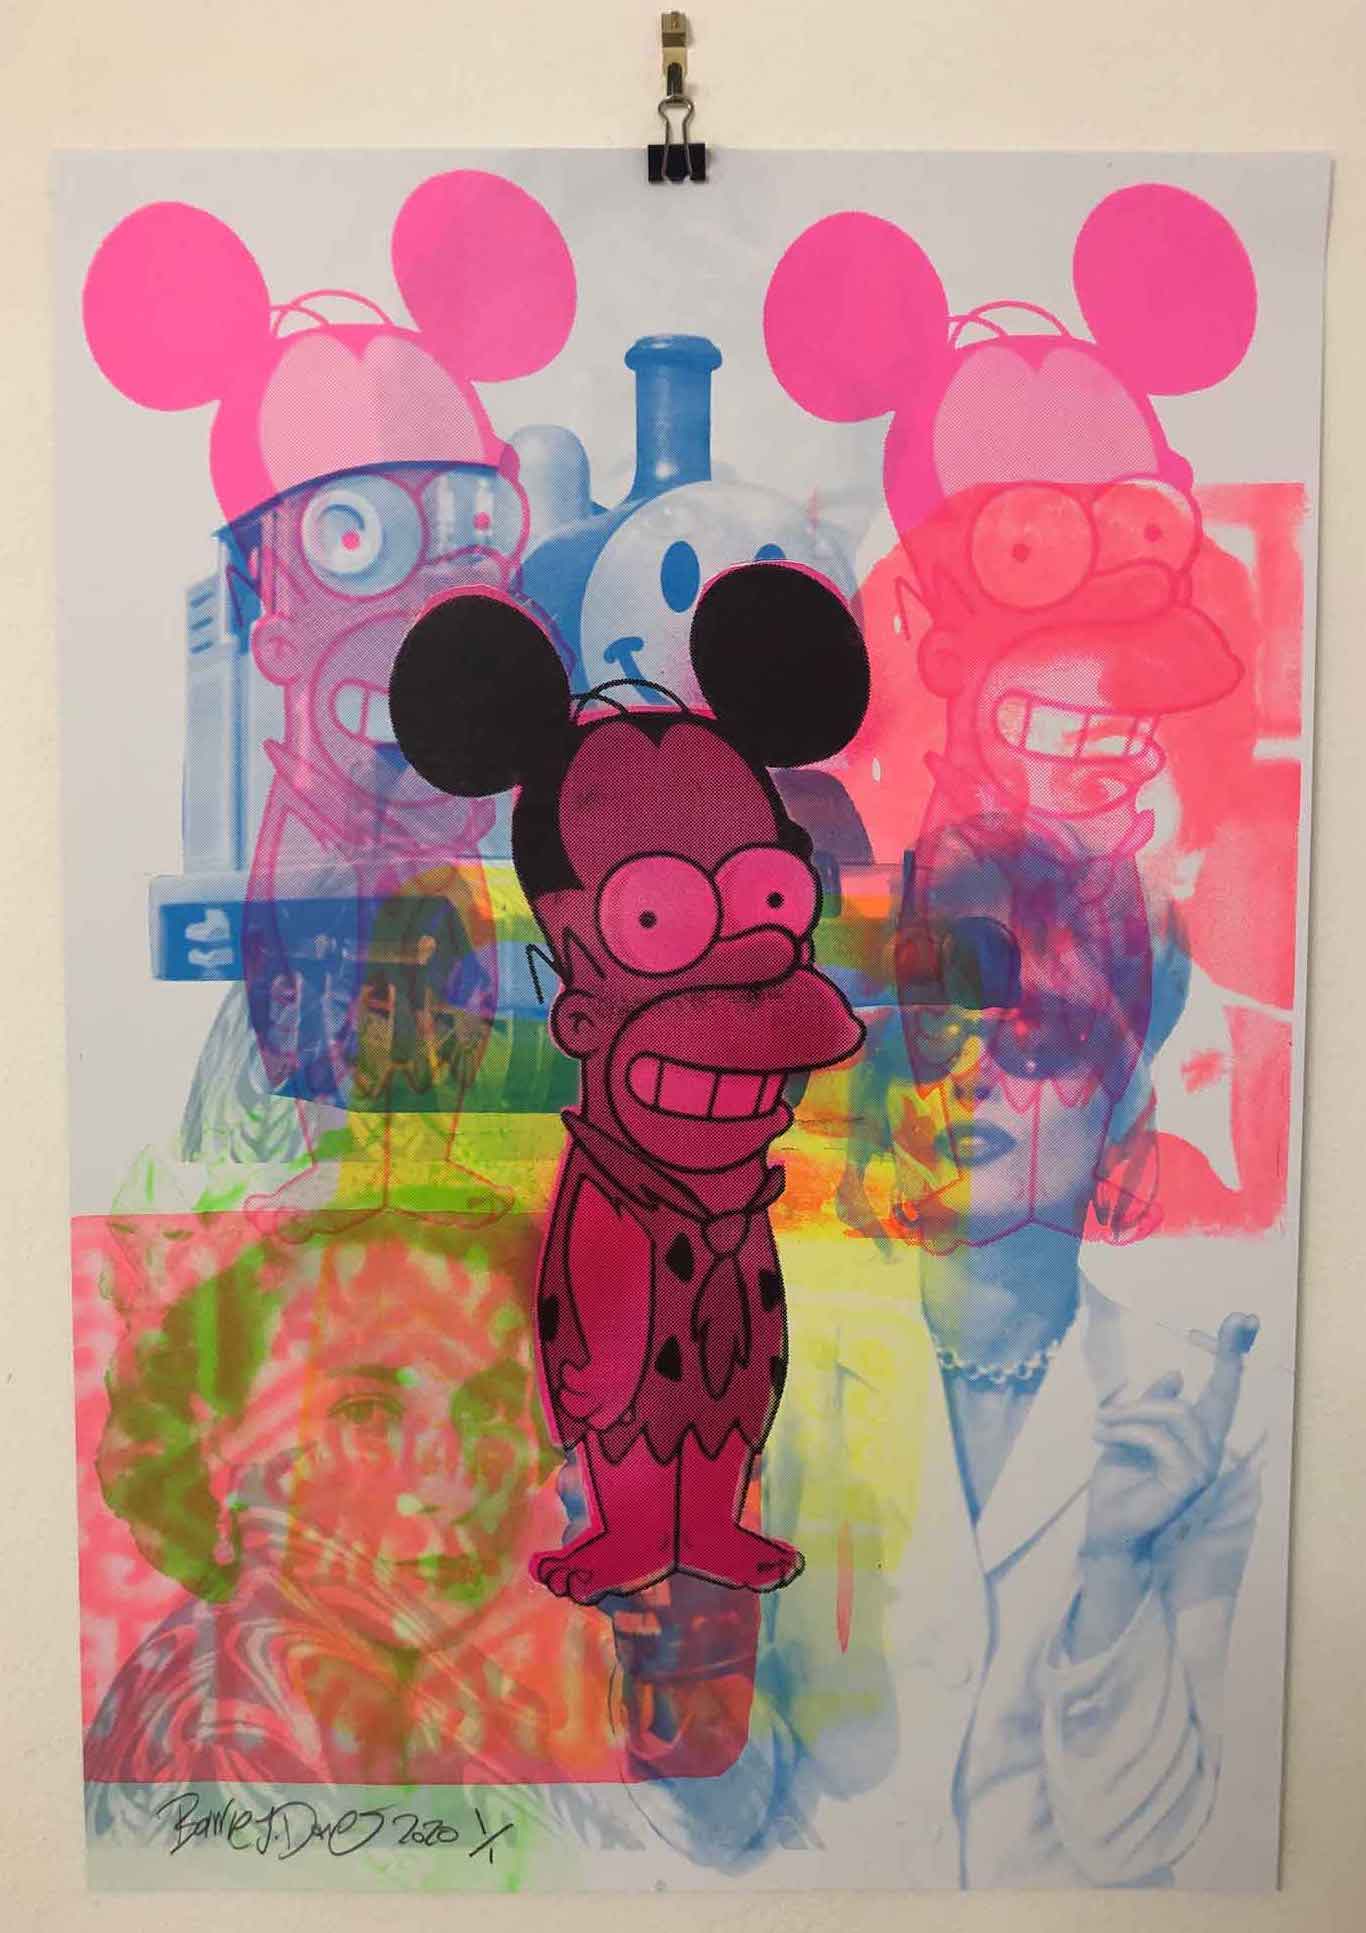 Monster Mash Print by Barrie J Davies 2020 - unframed Silkscreen print on paper (hand finished) edition of 1/1 - A2 size 42cm x 59.4cm.